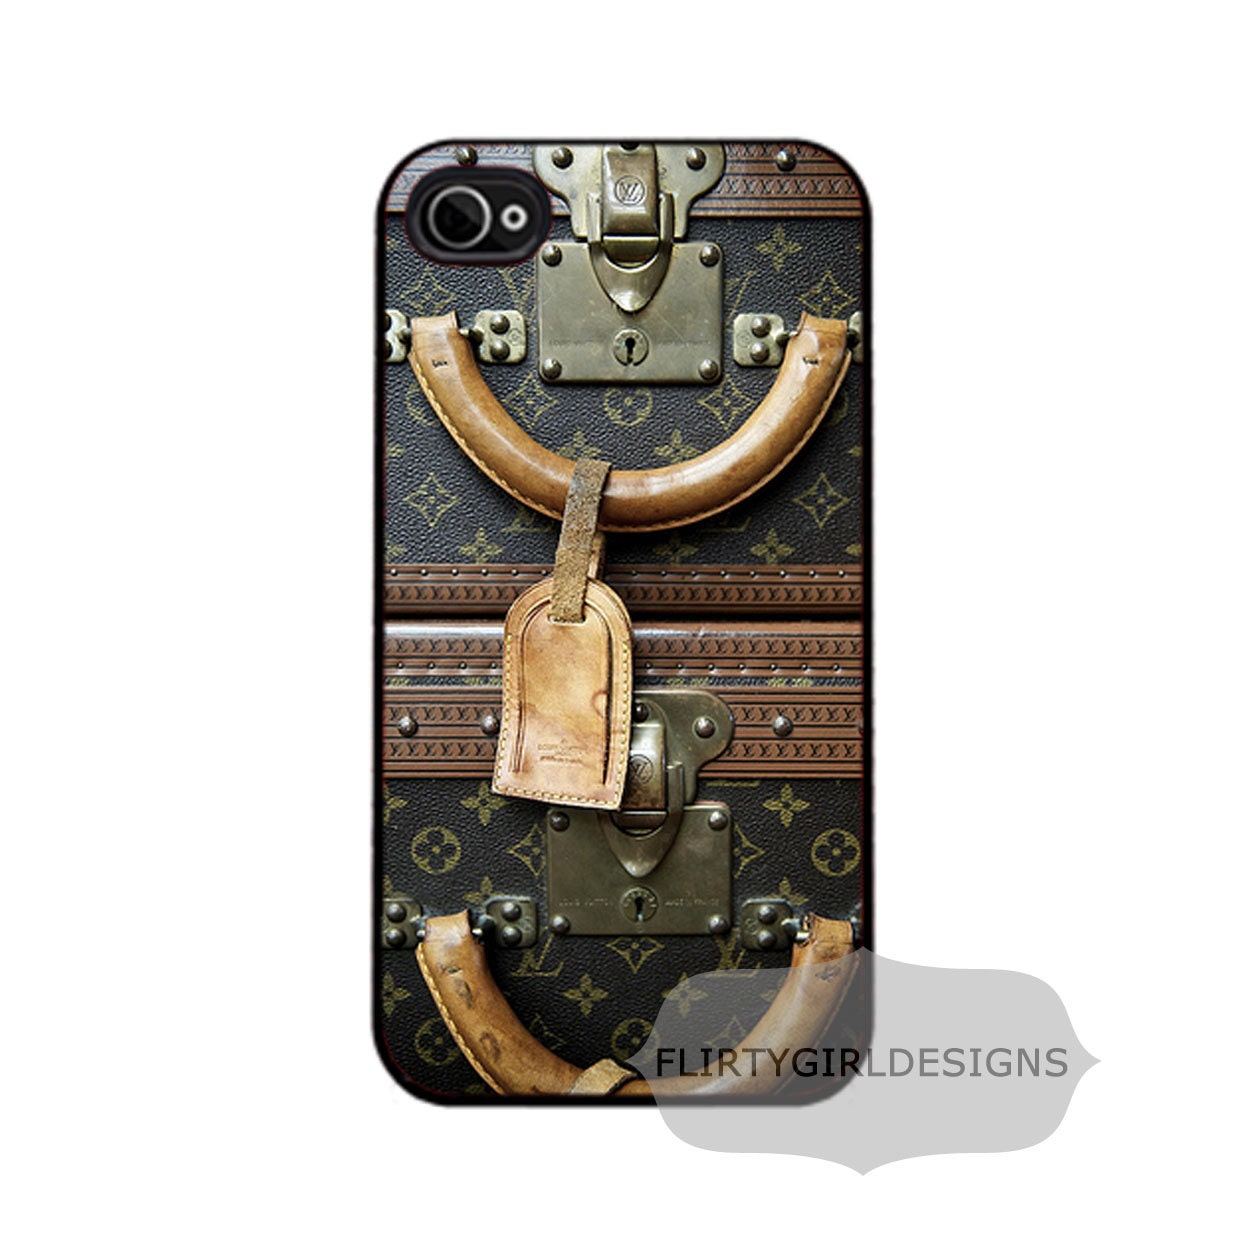 Items similar to iPhone 4/4s or 5 Apple iPhone hard Case cover louis vuitton vintage luggage on Etsy